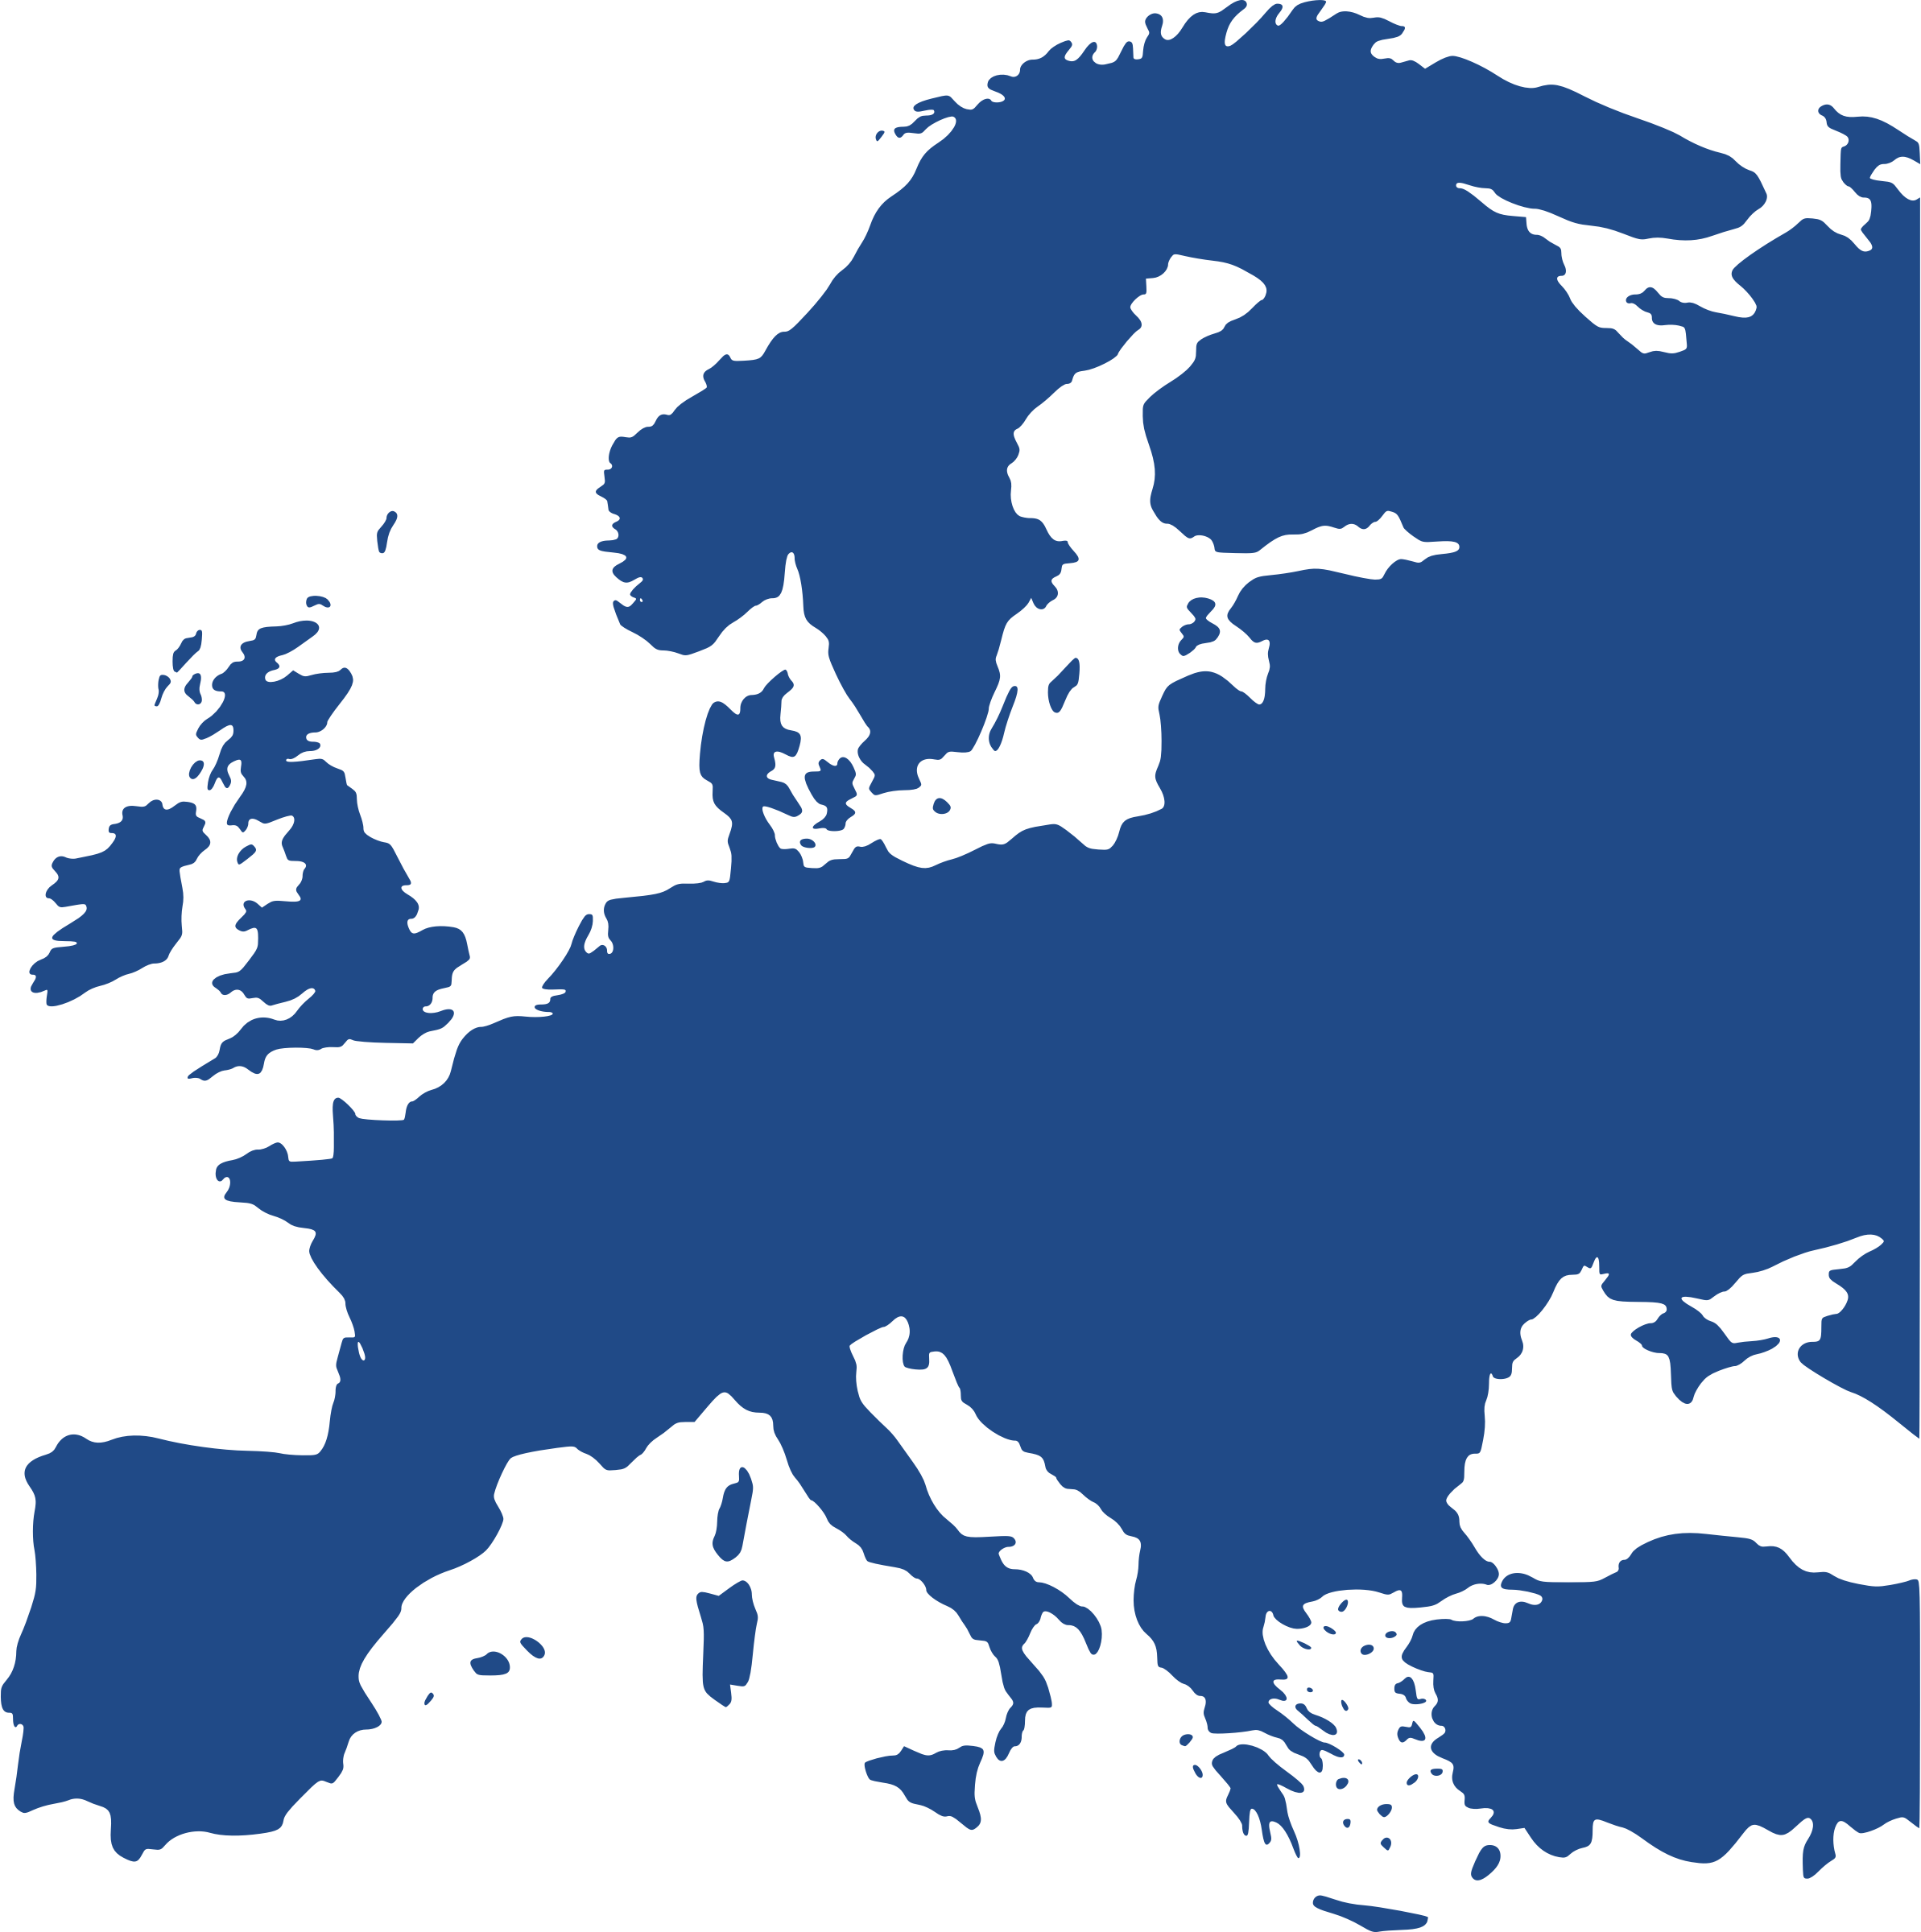 Europe Clipart.